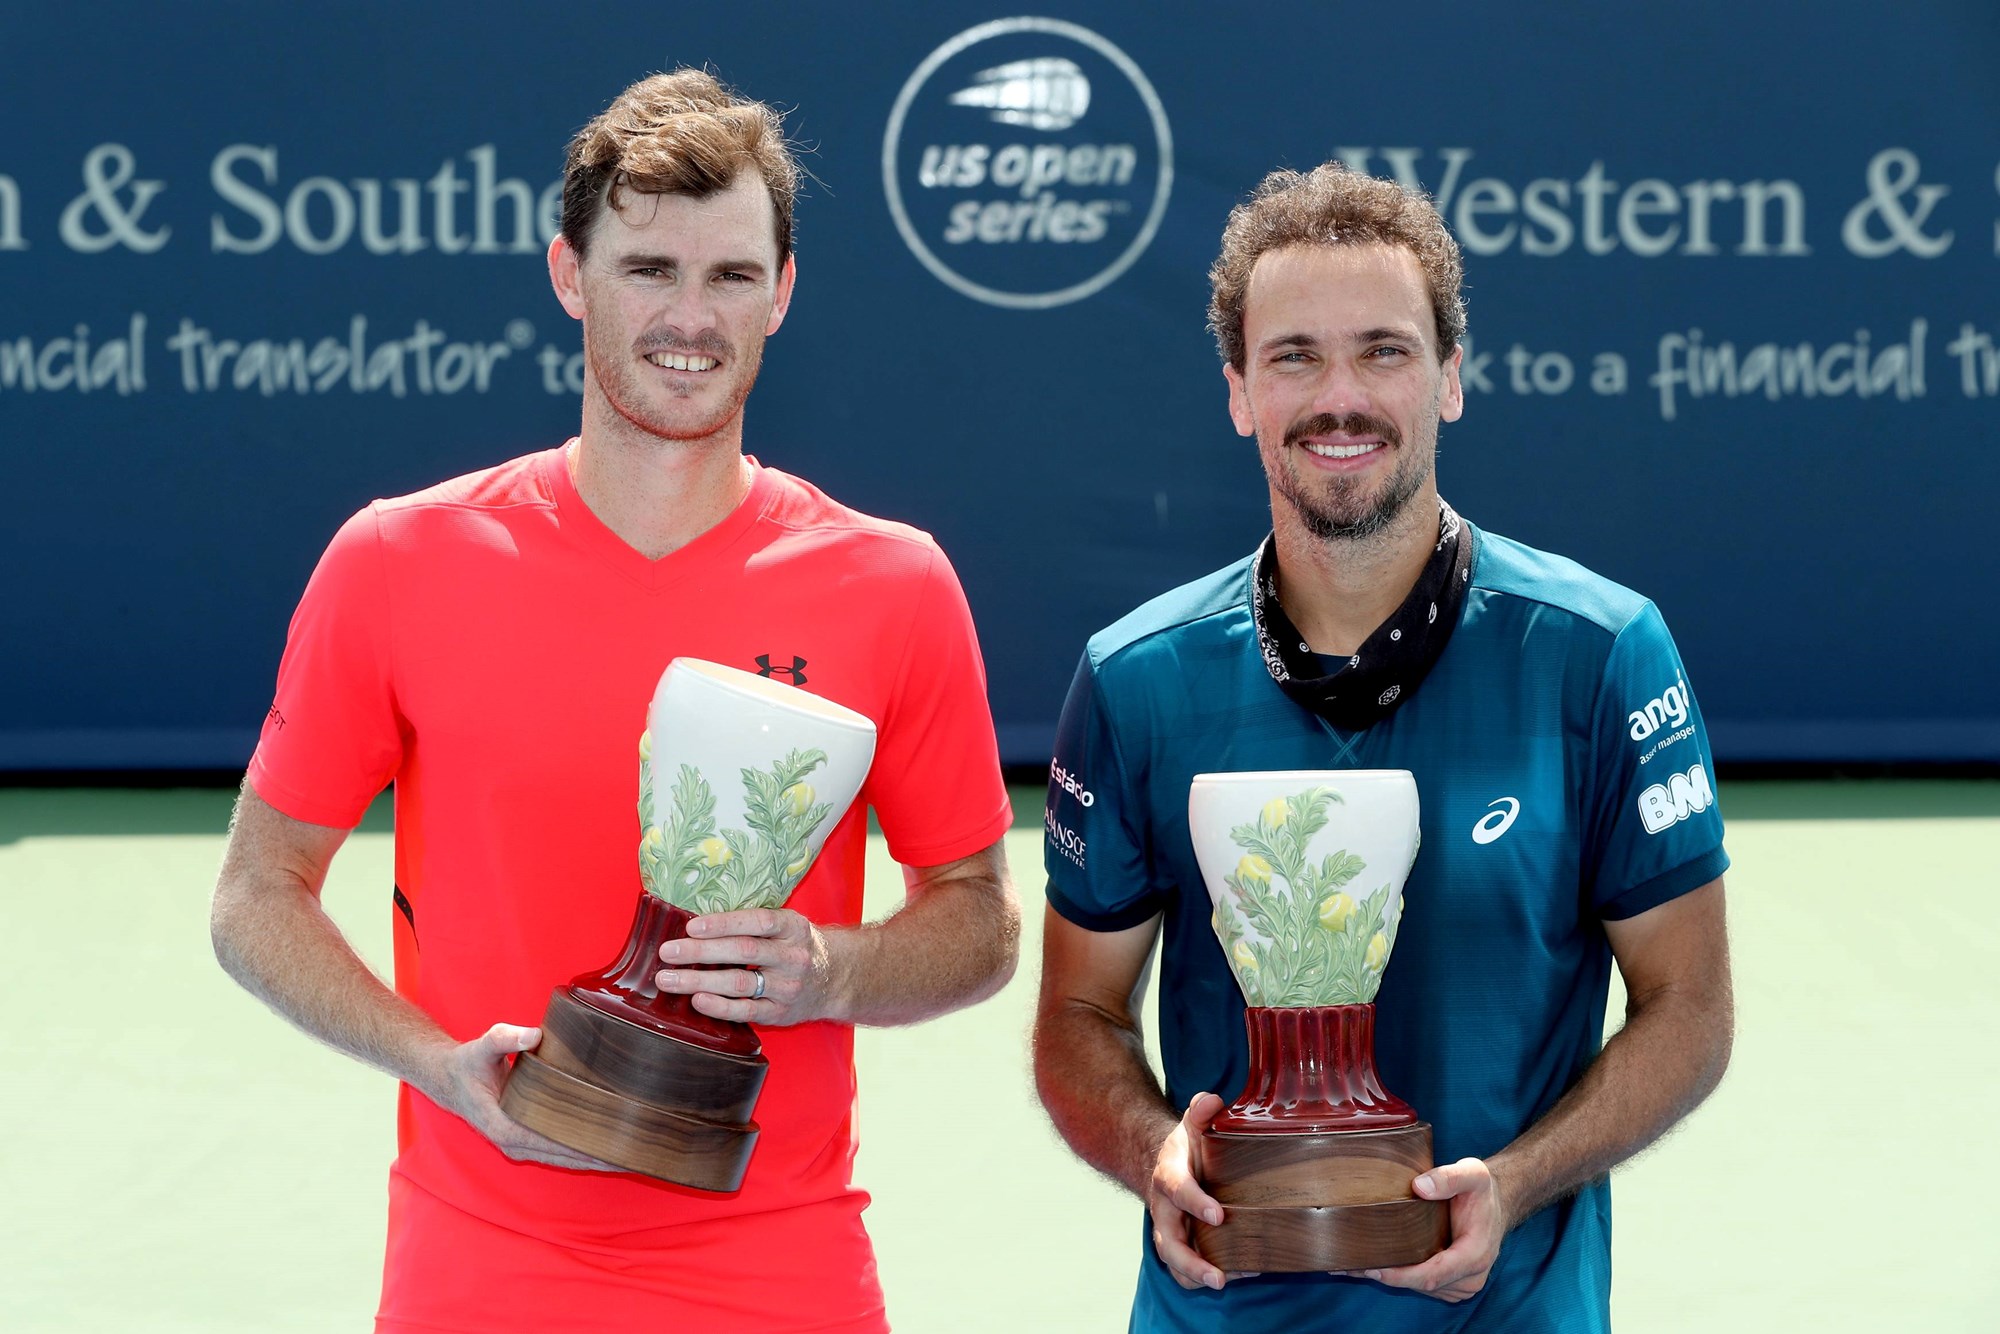 Jamie Murray and Bruno Soares holding the Western & Southern Open title in 2018